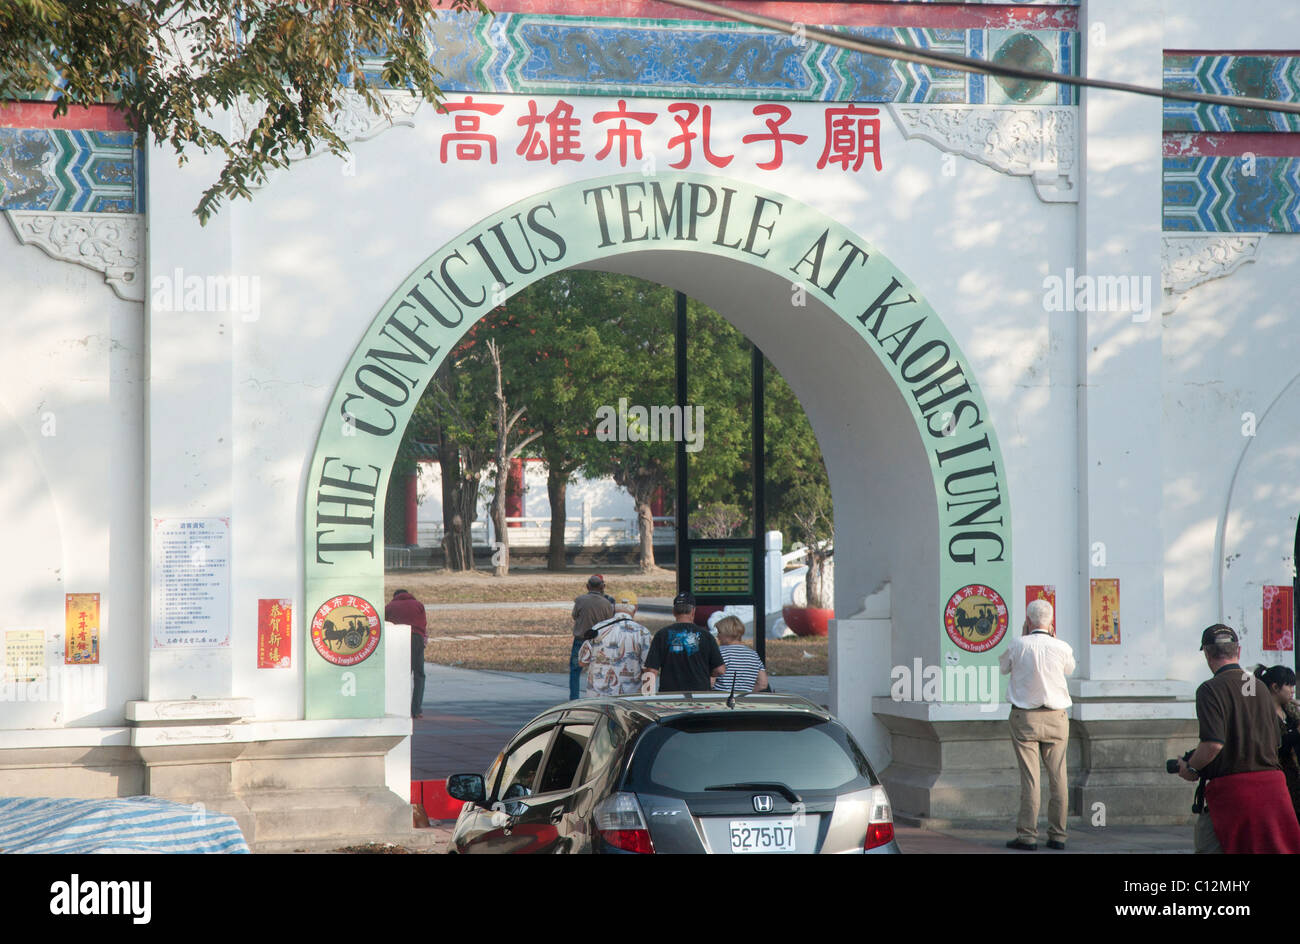 Entrance to Confucius Temple in Kaohsiung Taiwan Stock Photo